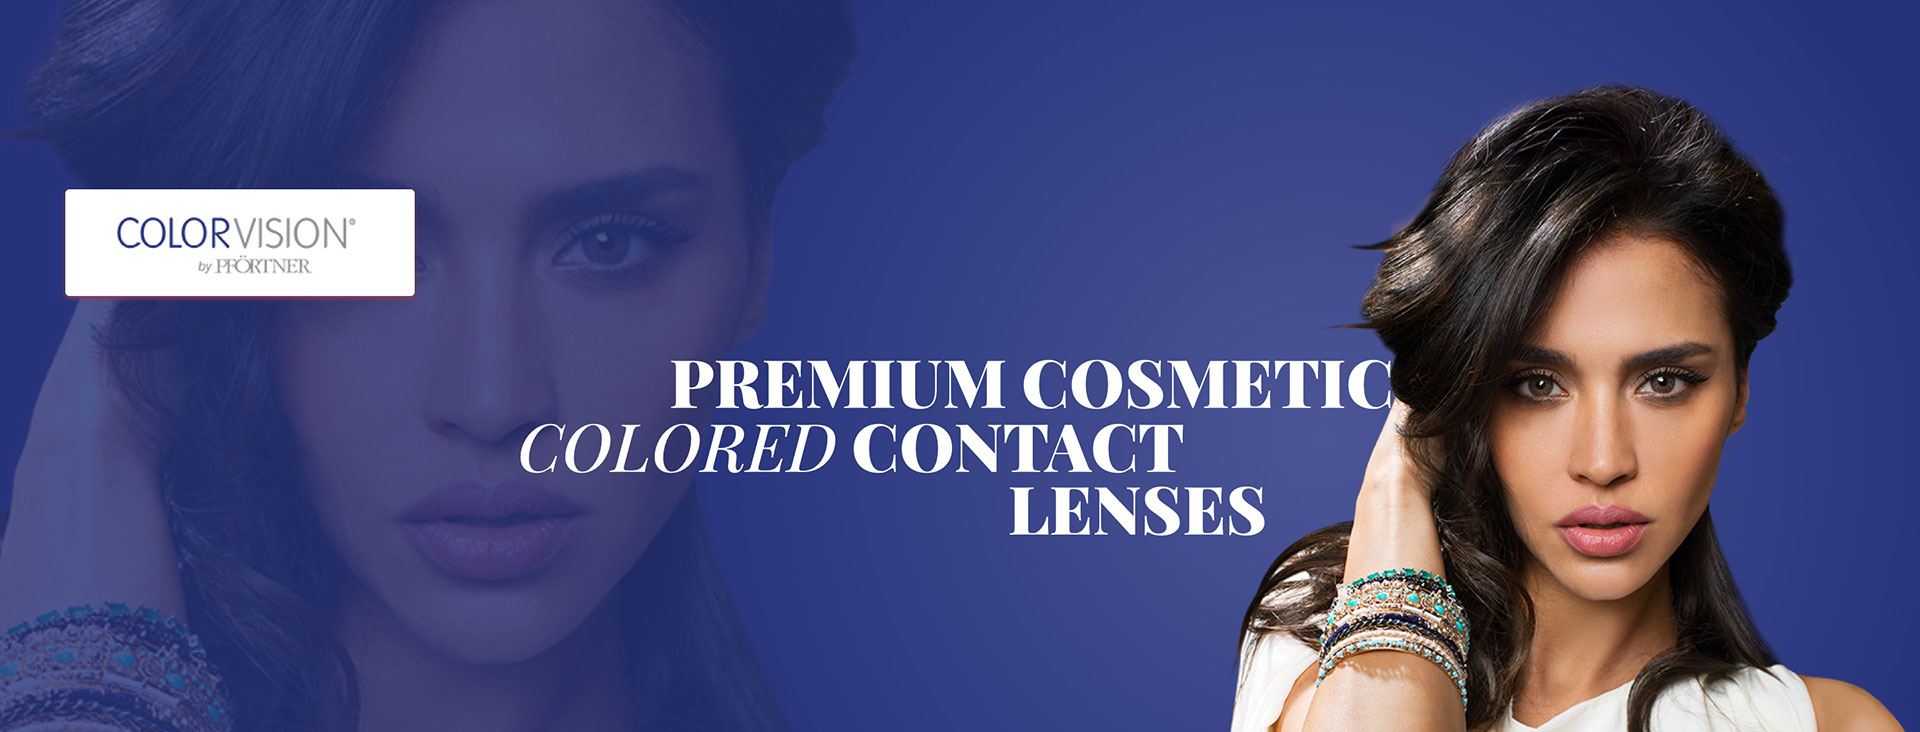 COLORVISION by Pförtner Premium Cosmetic Colored Contact Lenses